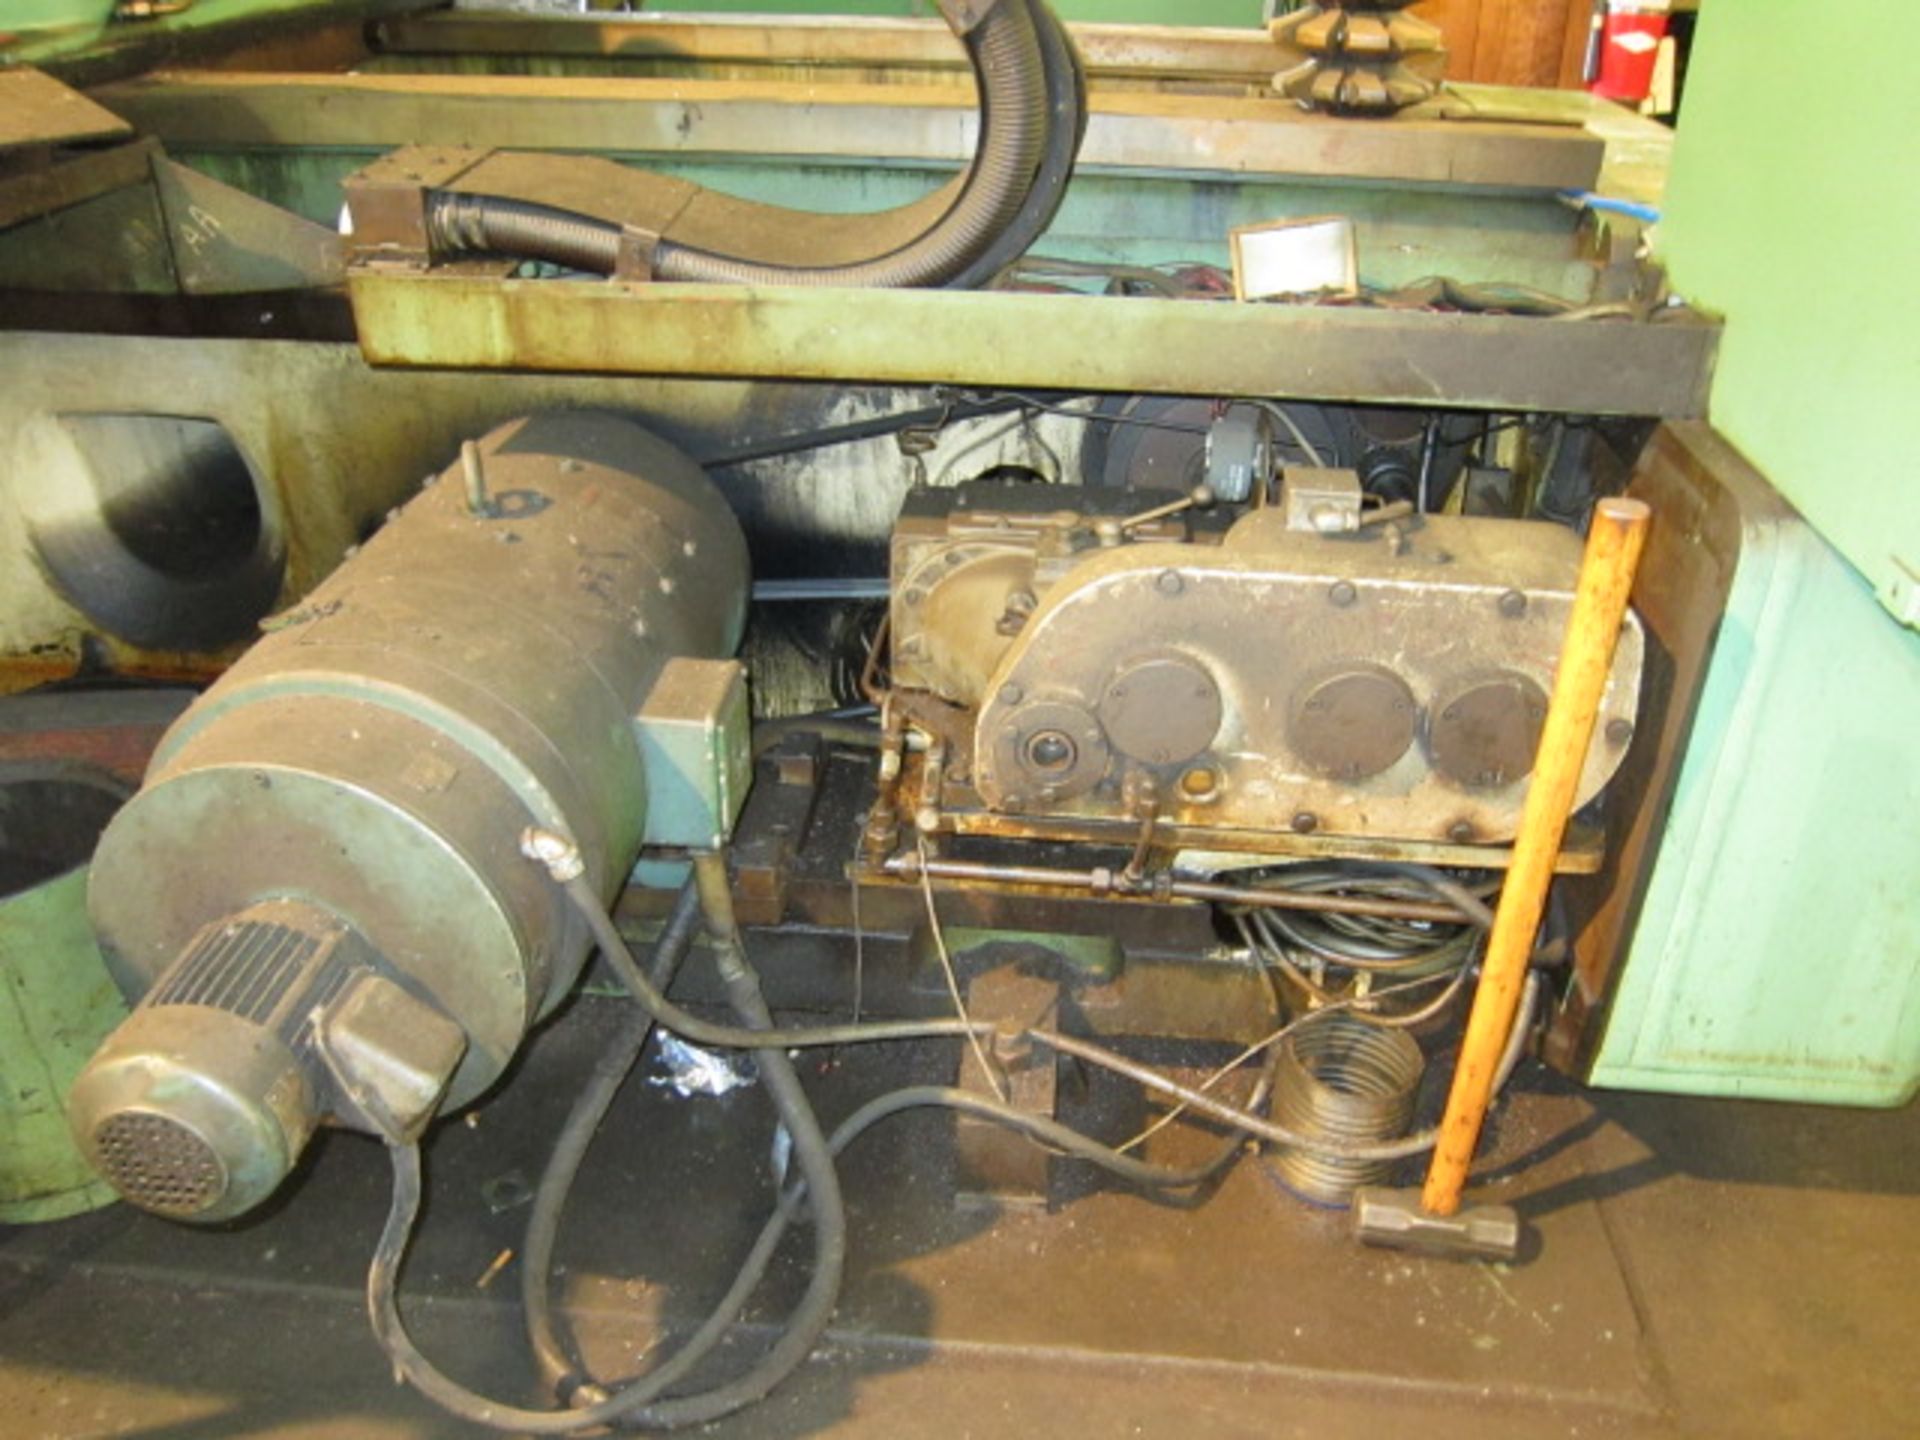 GEAR HOBBER, PFAUTER MDL. 3000-5000, new 1971, 120” to 200”, 1.27-DP max. cap., 9.8” max. face - Image 9 of 9